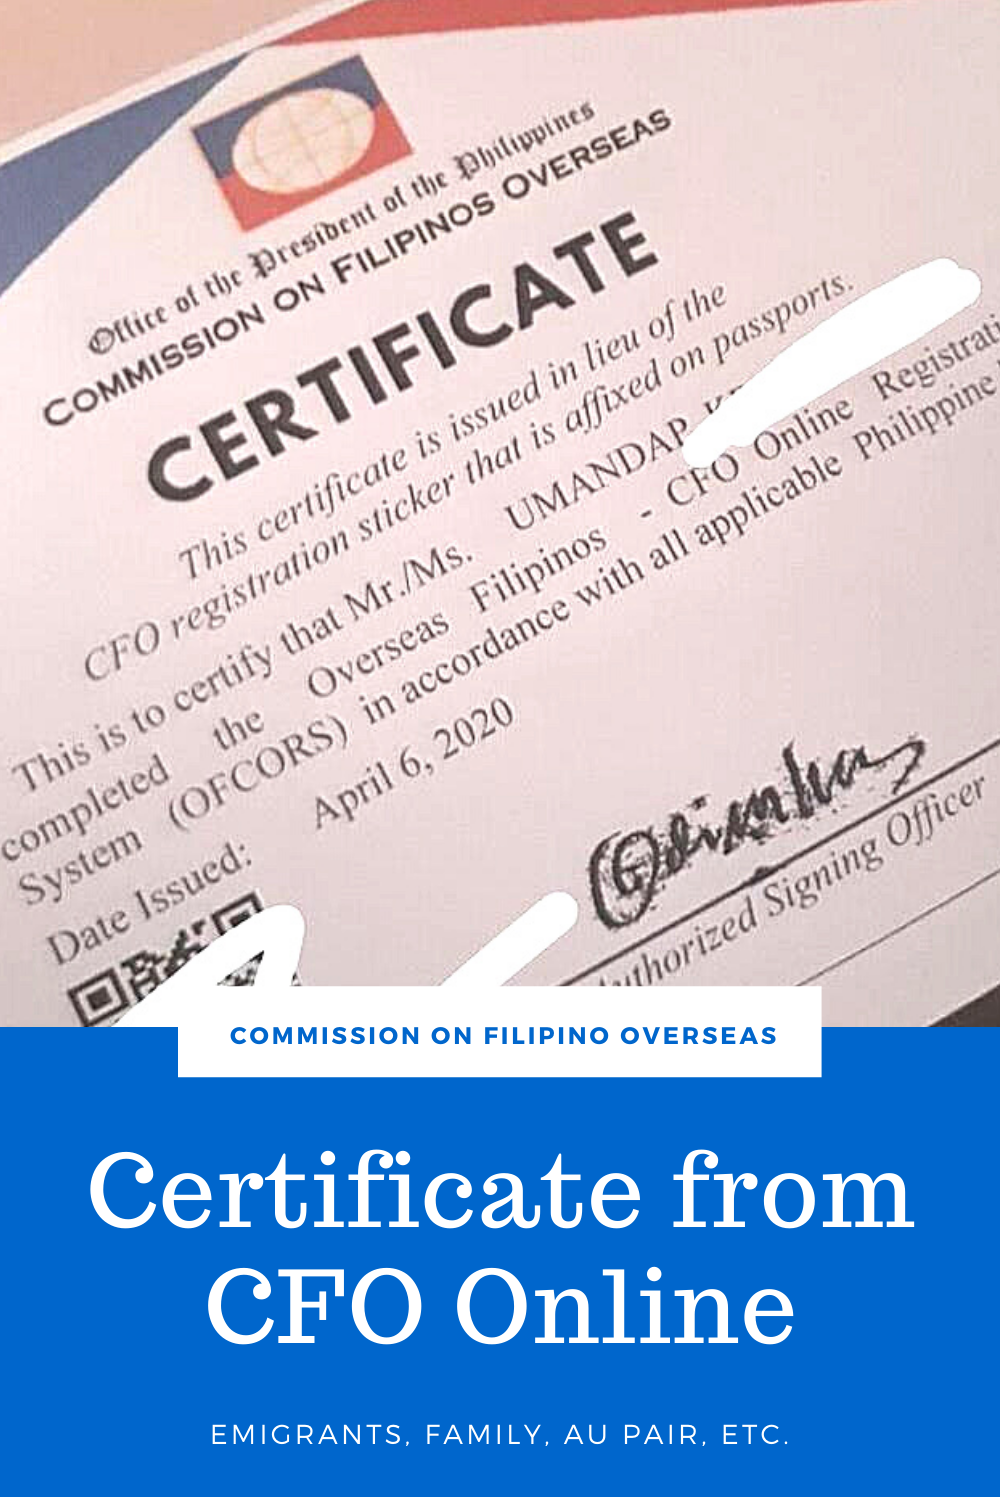 How to get a Certificate from CFO Online